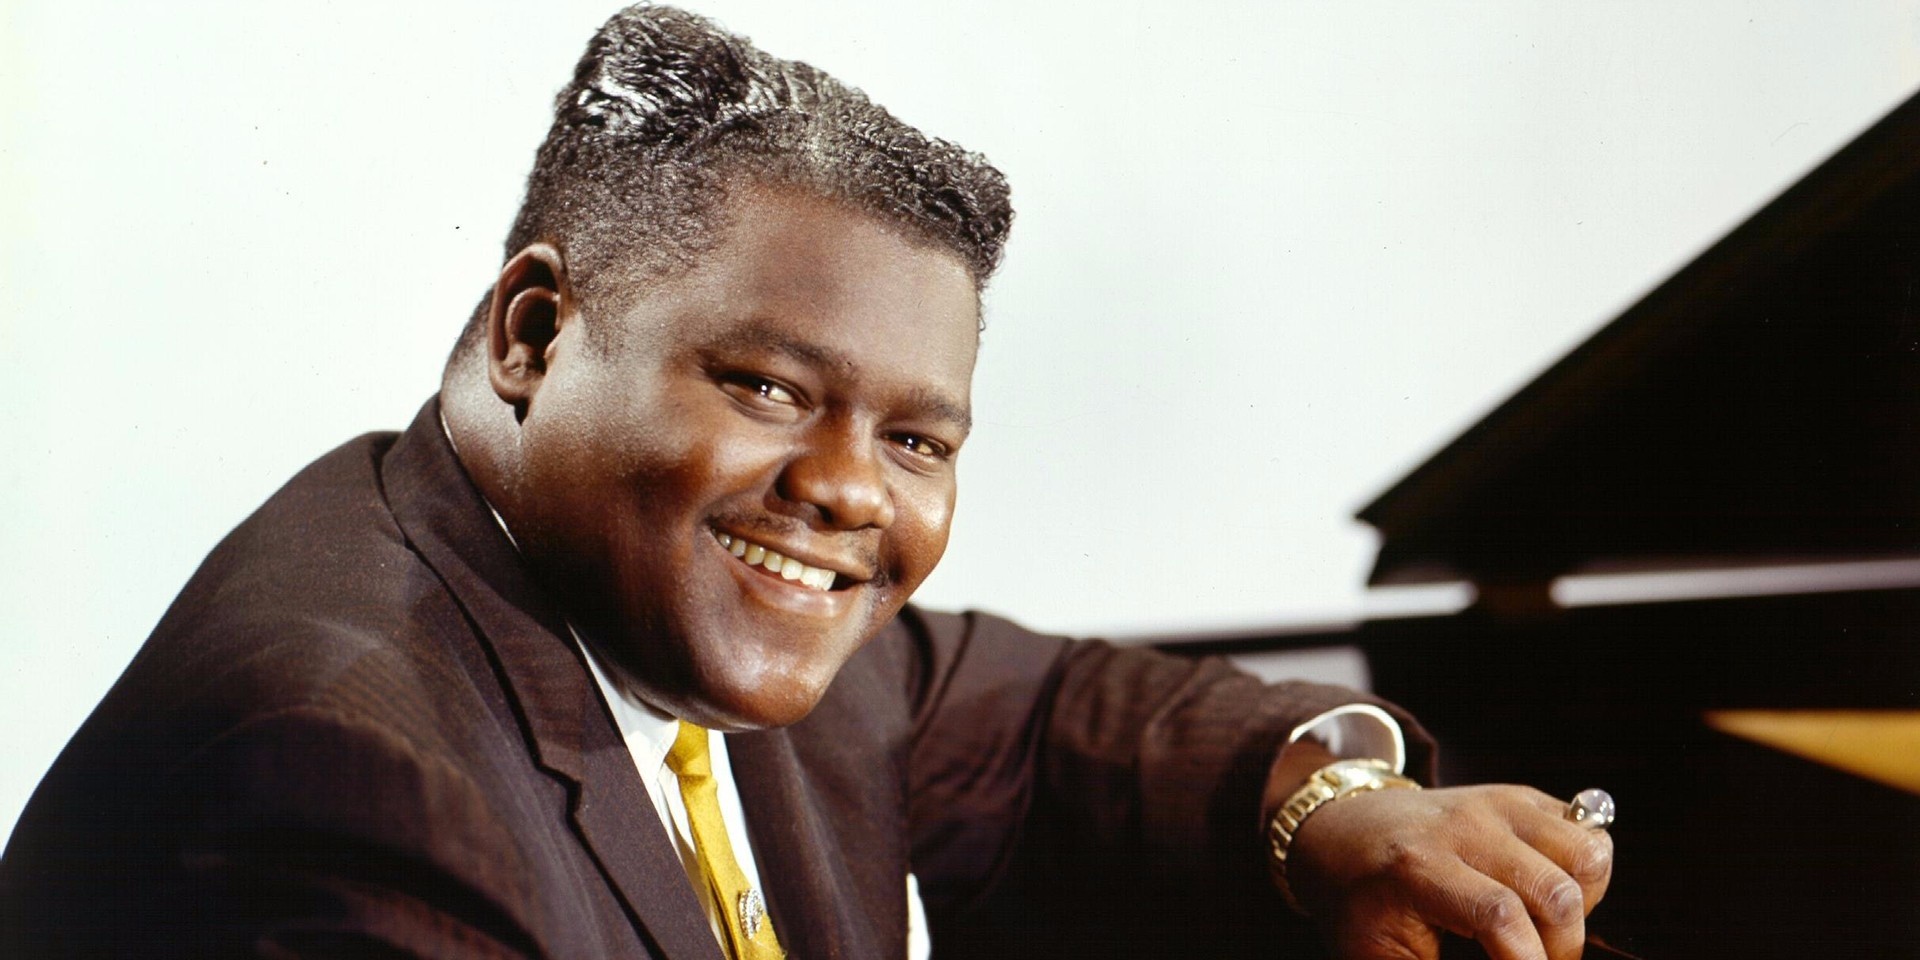 Rock 'n' roll pioneer Fats Domino passes at 89